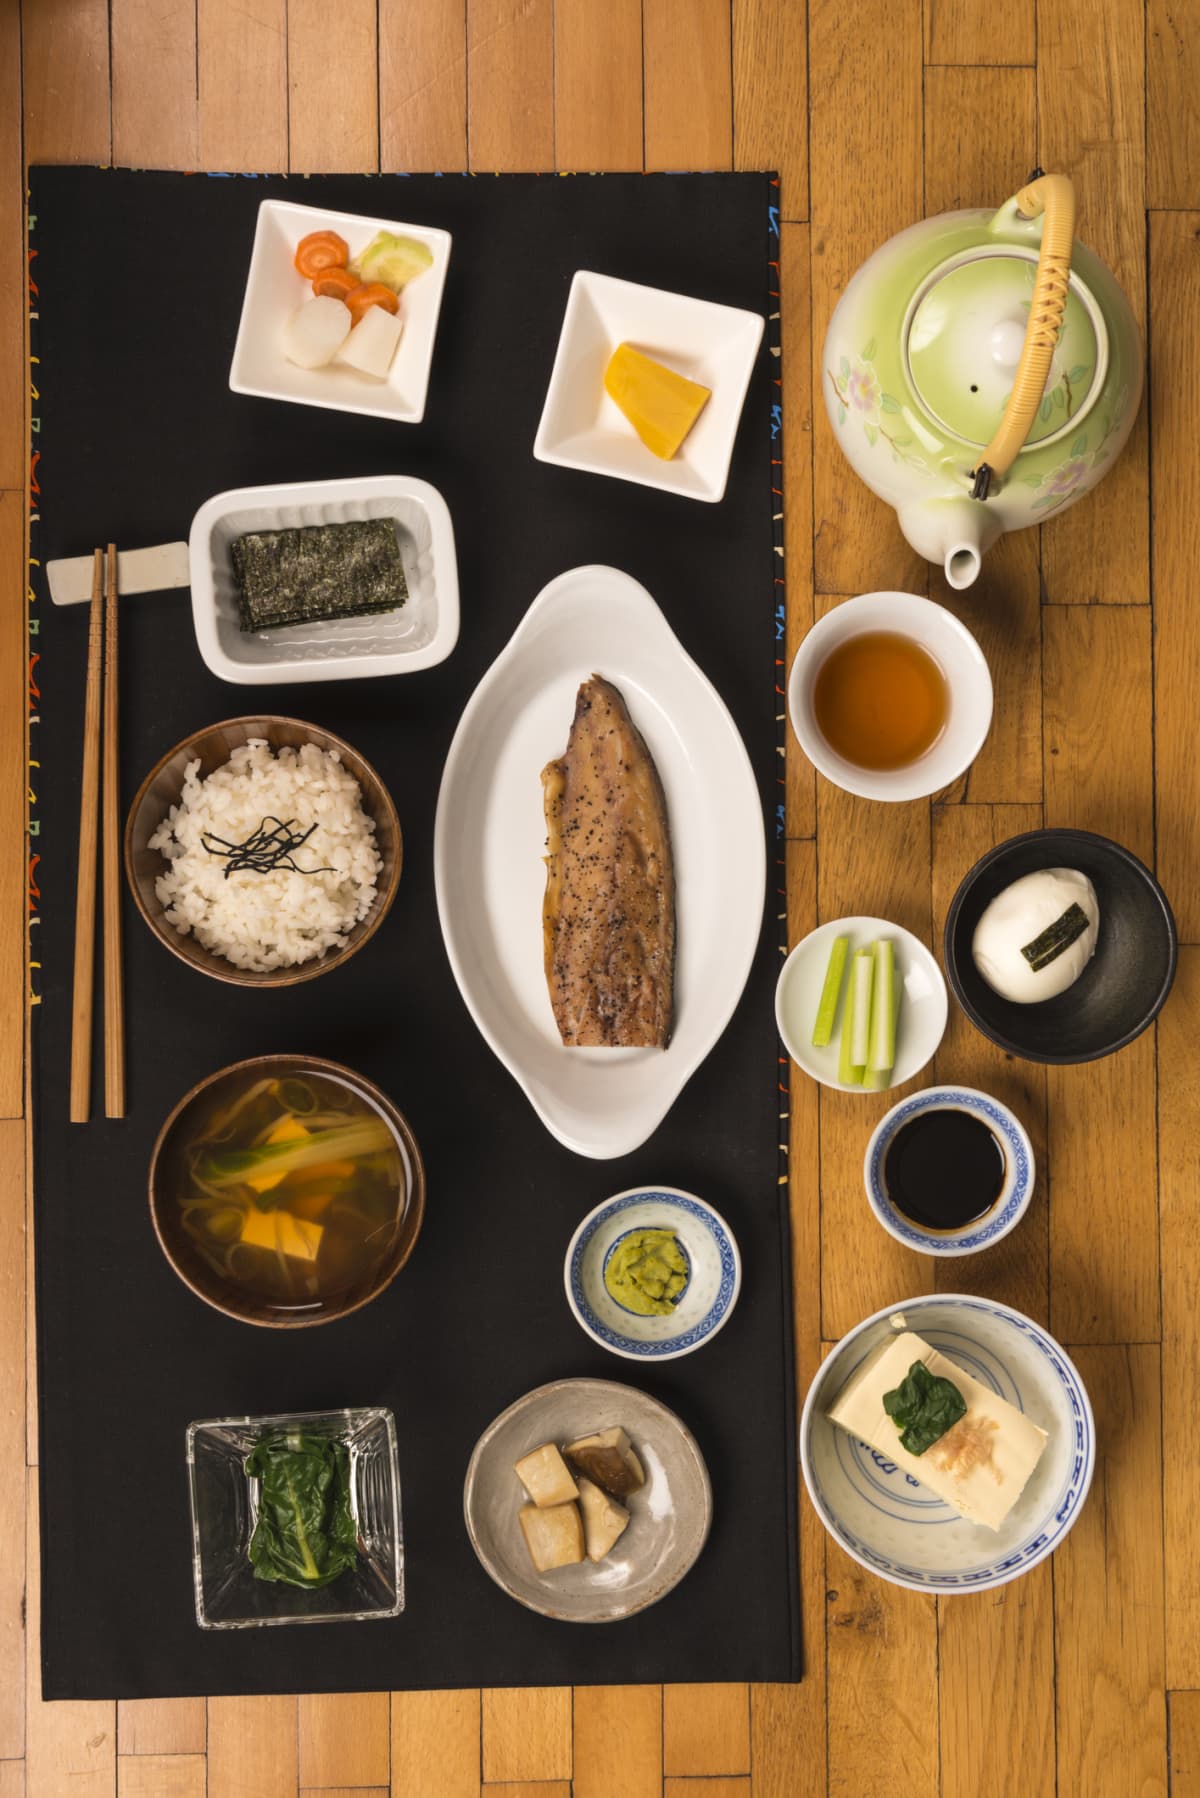 Japanese breakfast with a variety of foods, miso soup, rice, fish, pickel, nori, various vegetables and tea on wooden background.